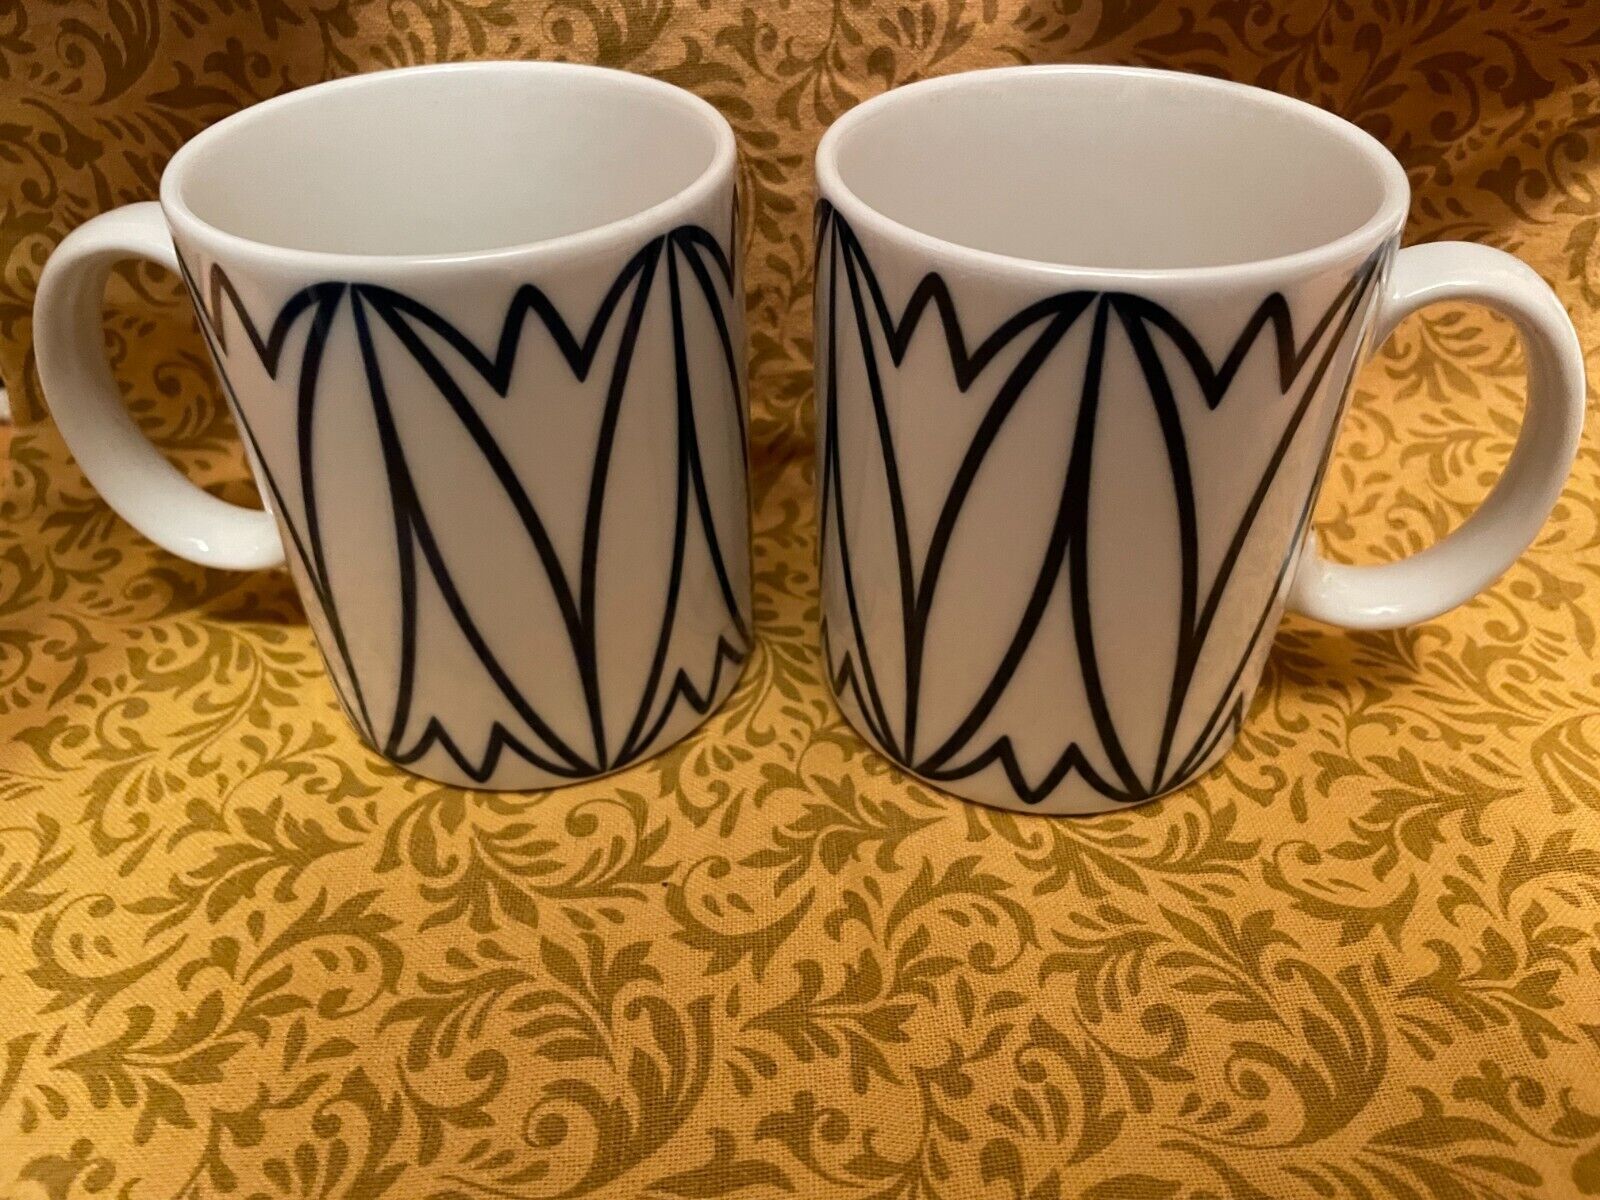 Primary image for MIKASA Lavina  Cobalt 2 Porcelain Coffee Mugs Replacement